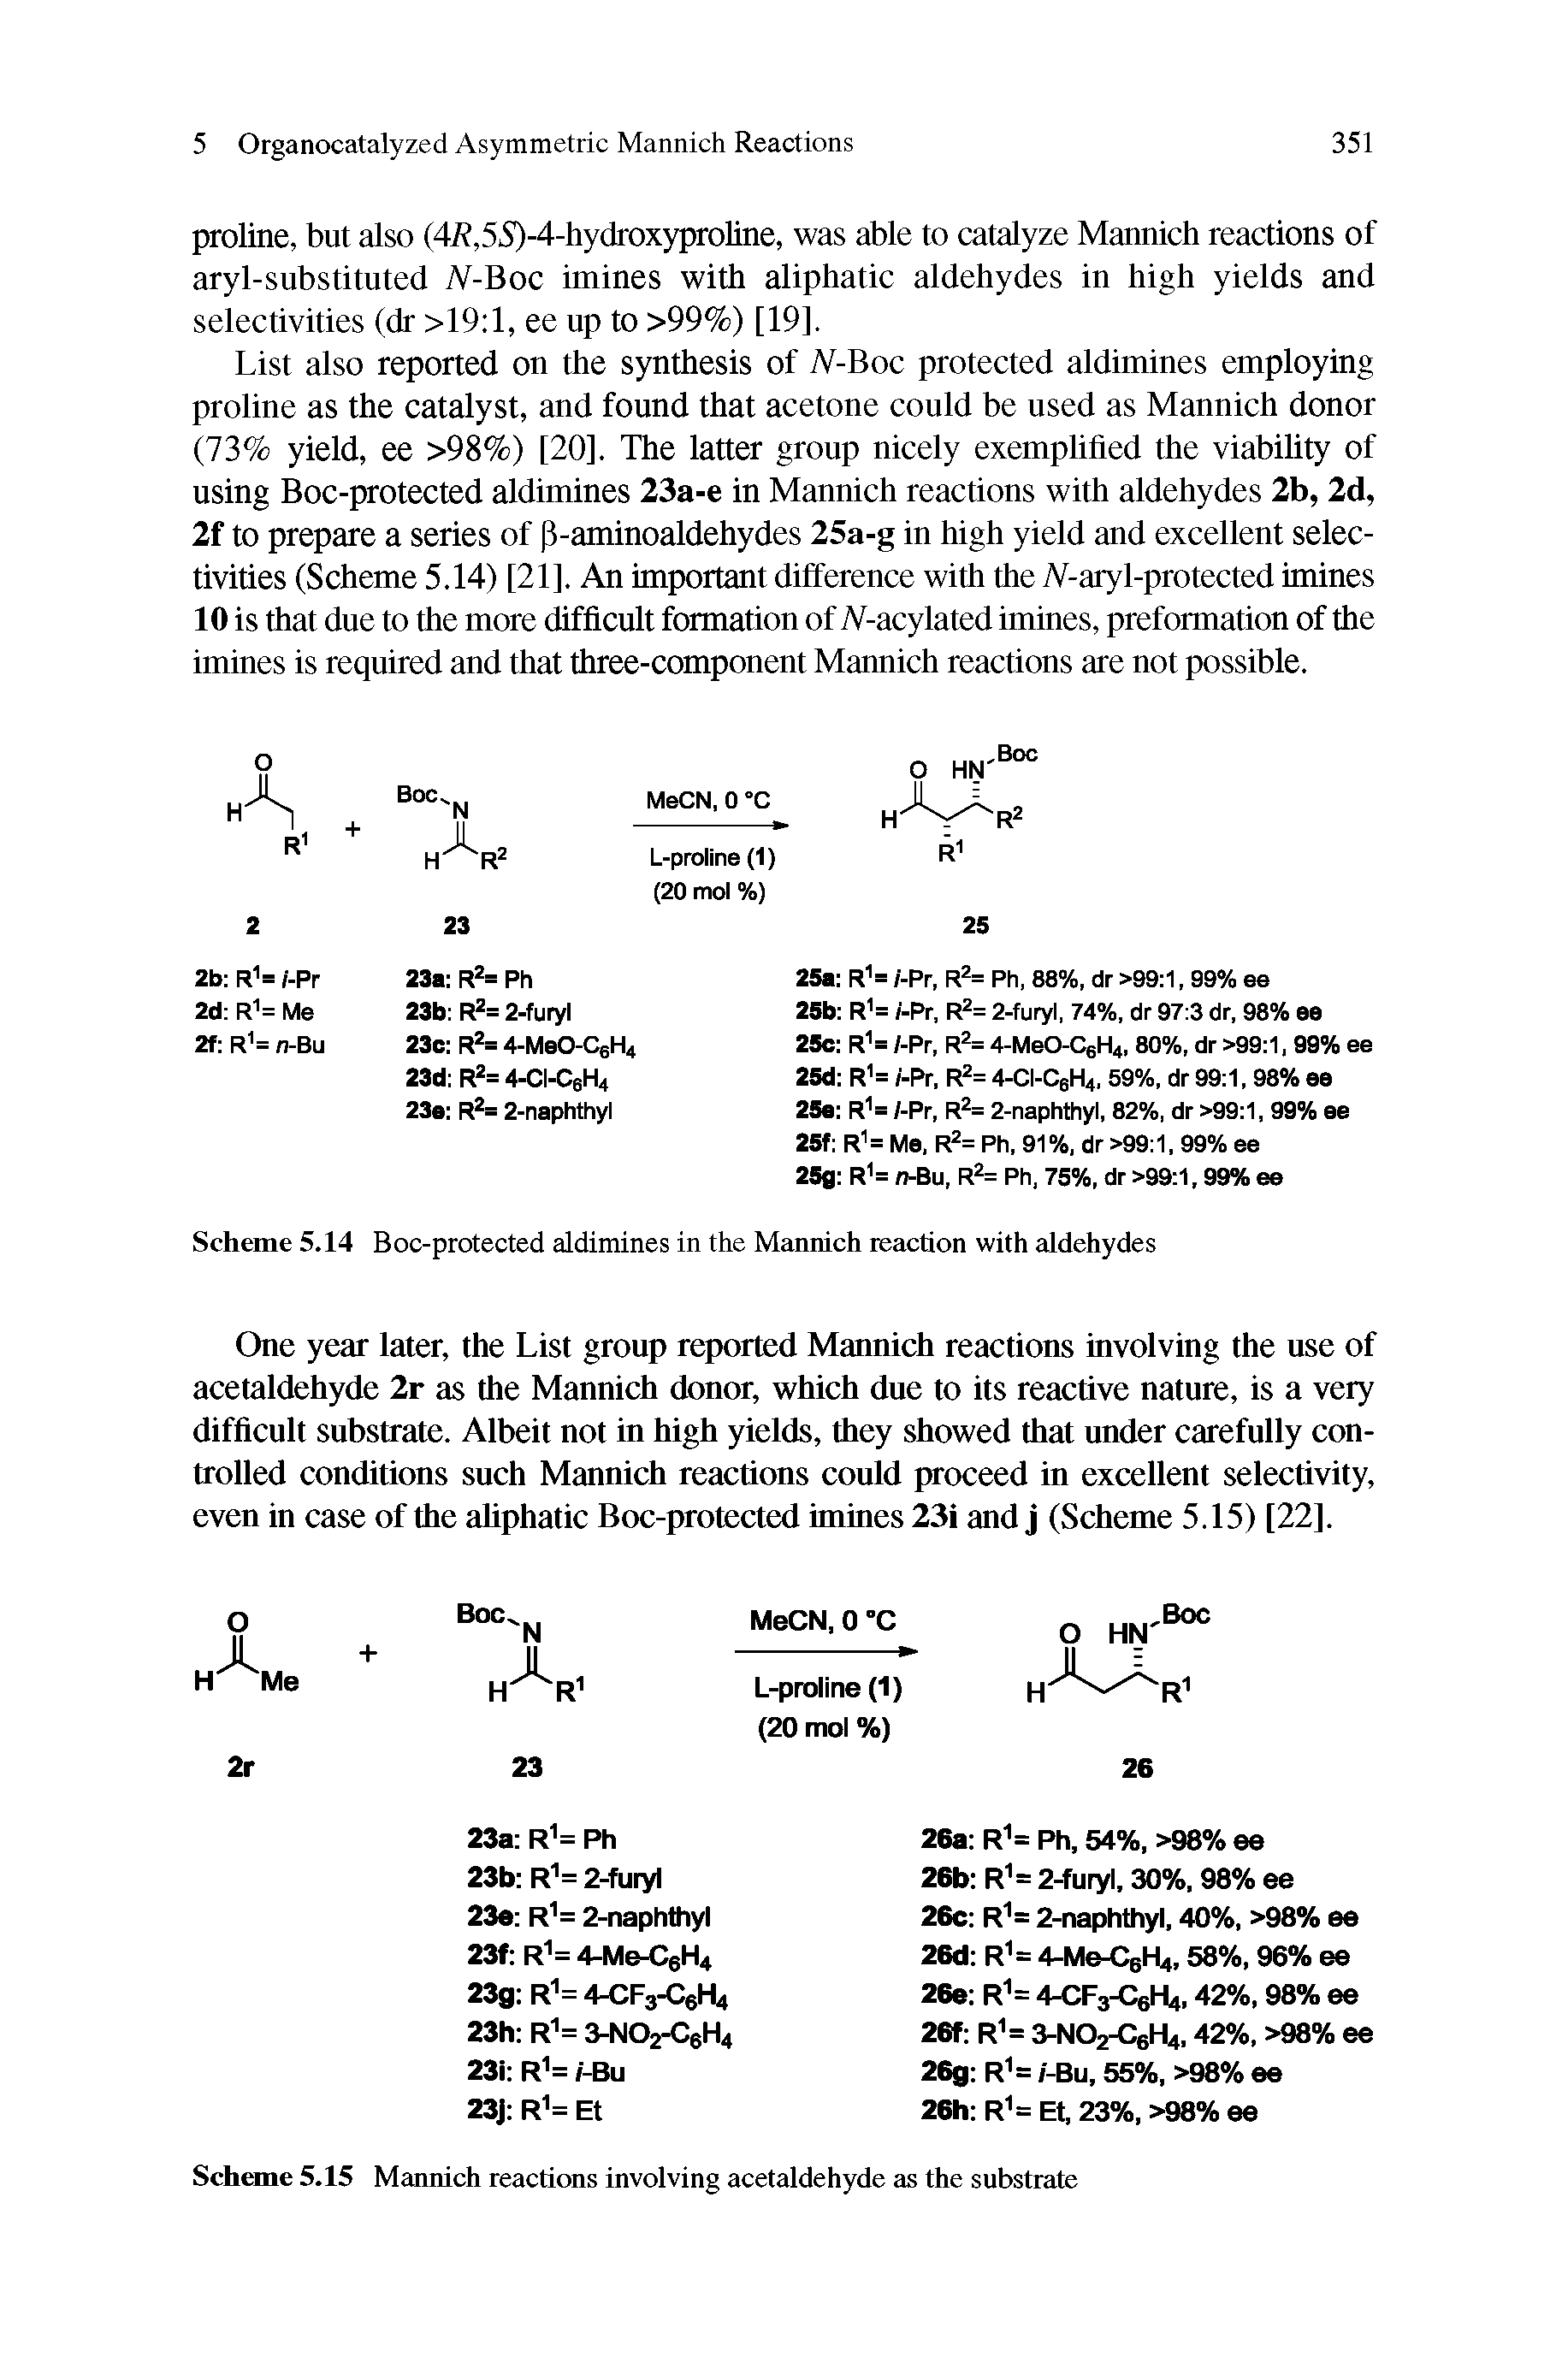 Scheme 5.15 Mannich reactions involving acetaldehyde as the substrate...